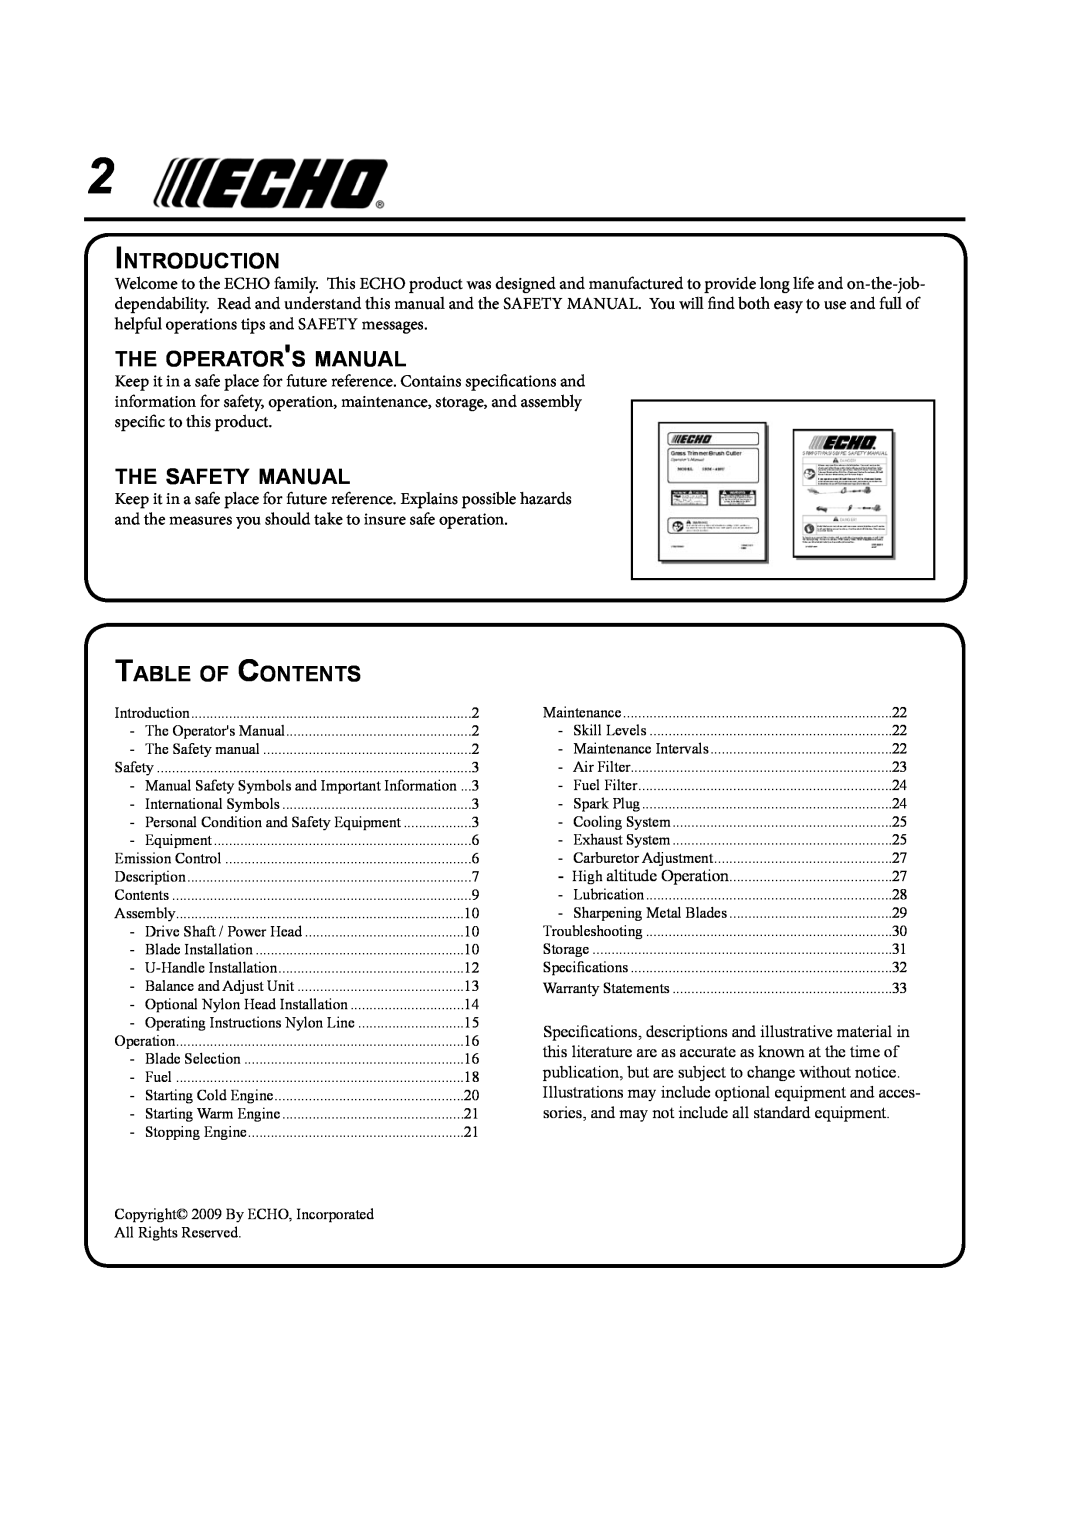 Echo SRM-410U manual Introduction, The Operators Manual, The Safety Manual, Table Of Contents 